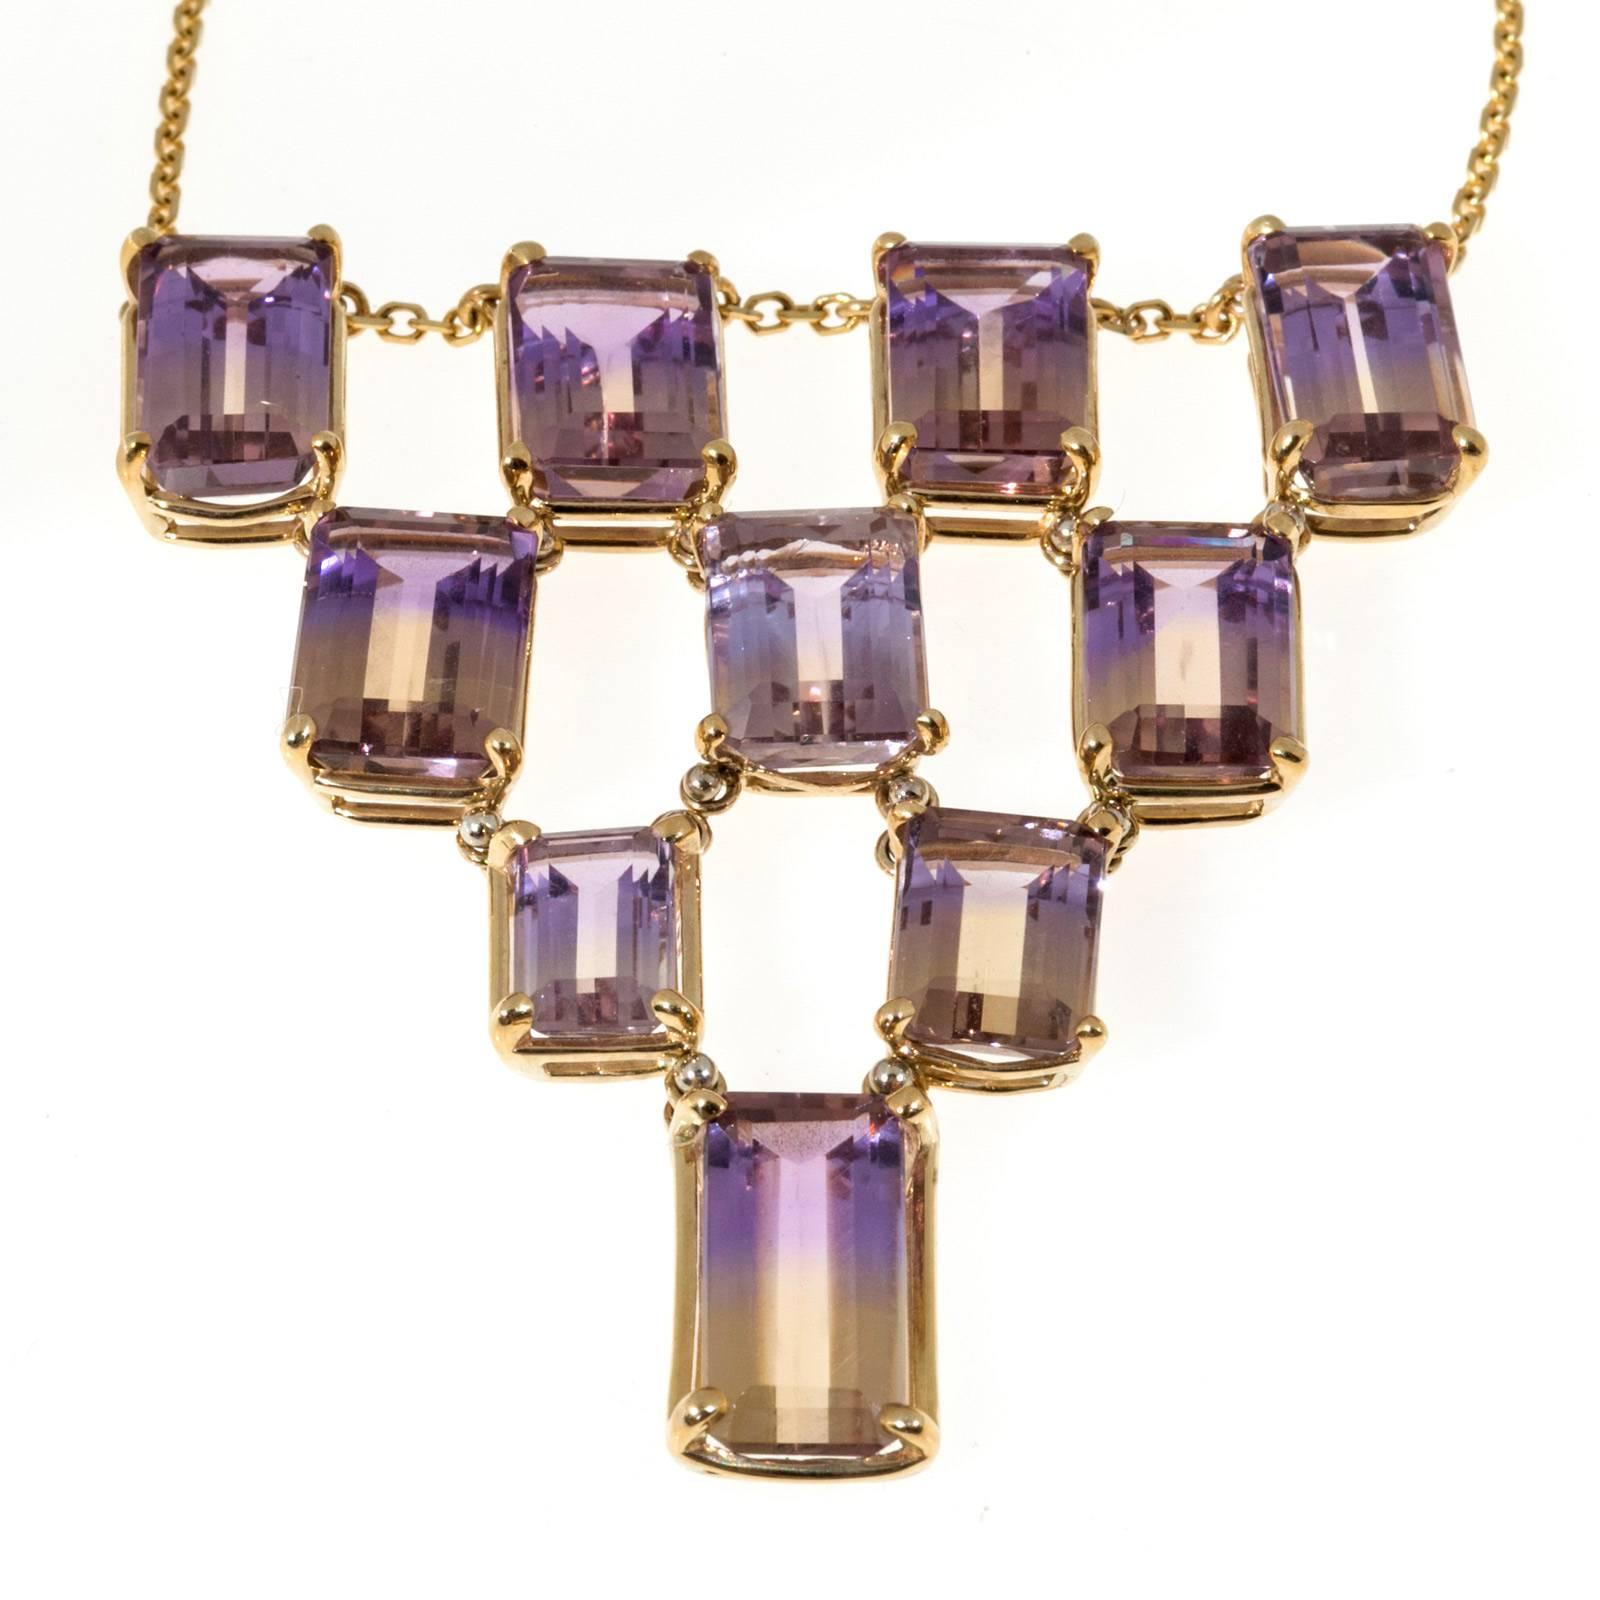 Ametrine 10 stone necklace handmade in a hinged style. 44.81cts of Ametrine. The necklace is handmade of hinged basket Art Deco style settings in the Peter Suchy Workshop.

10 emerald cut genuine Ametrine 44.81cts.
Center pendant section is